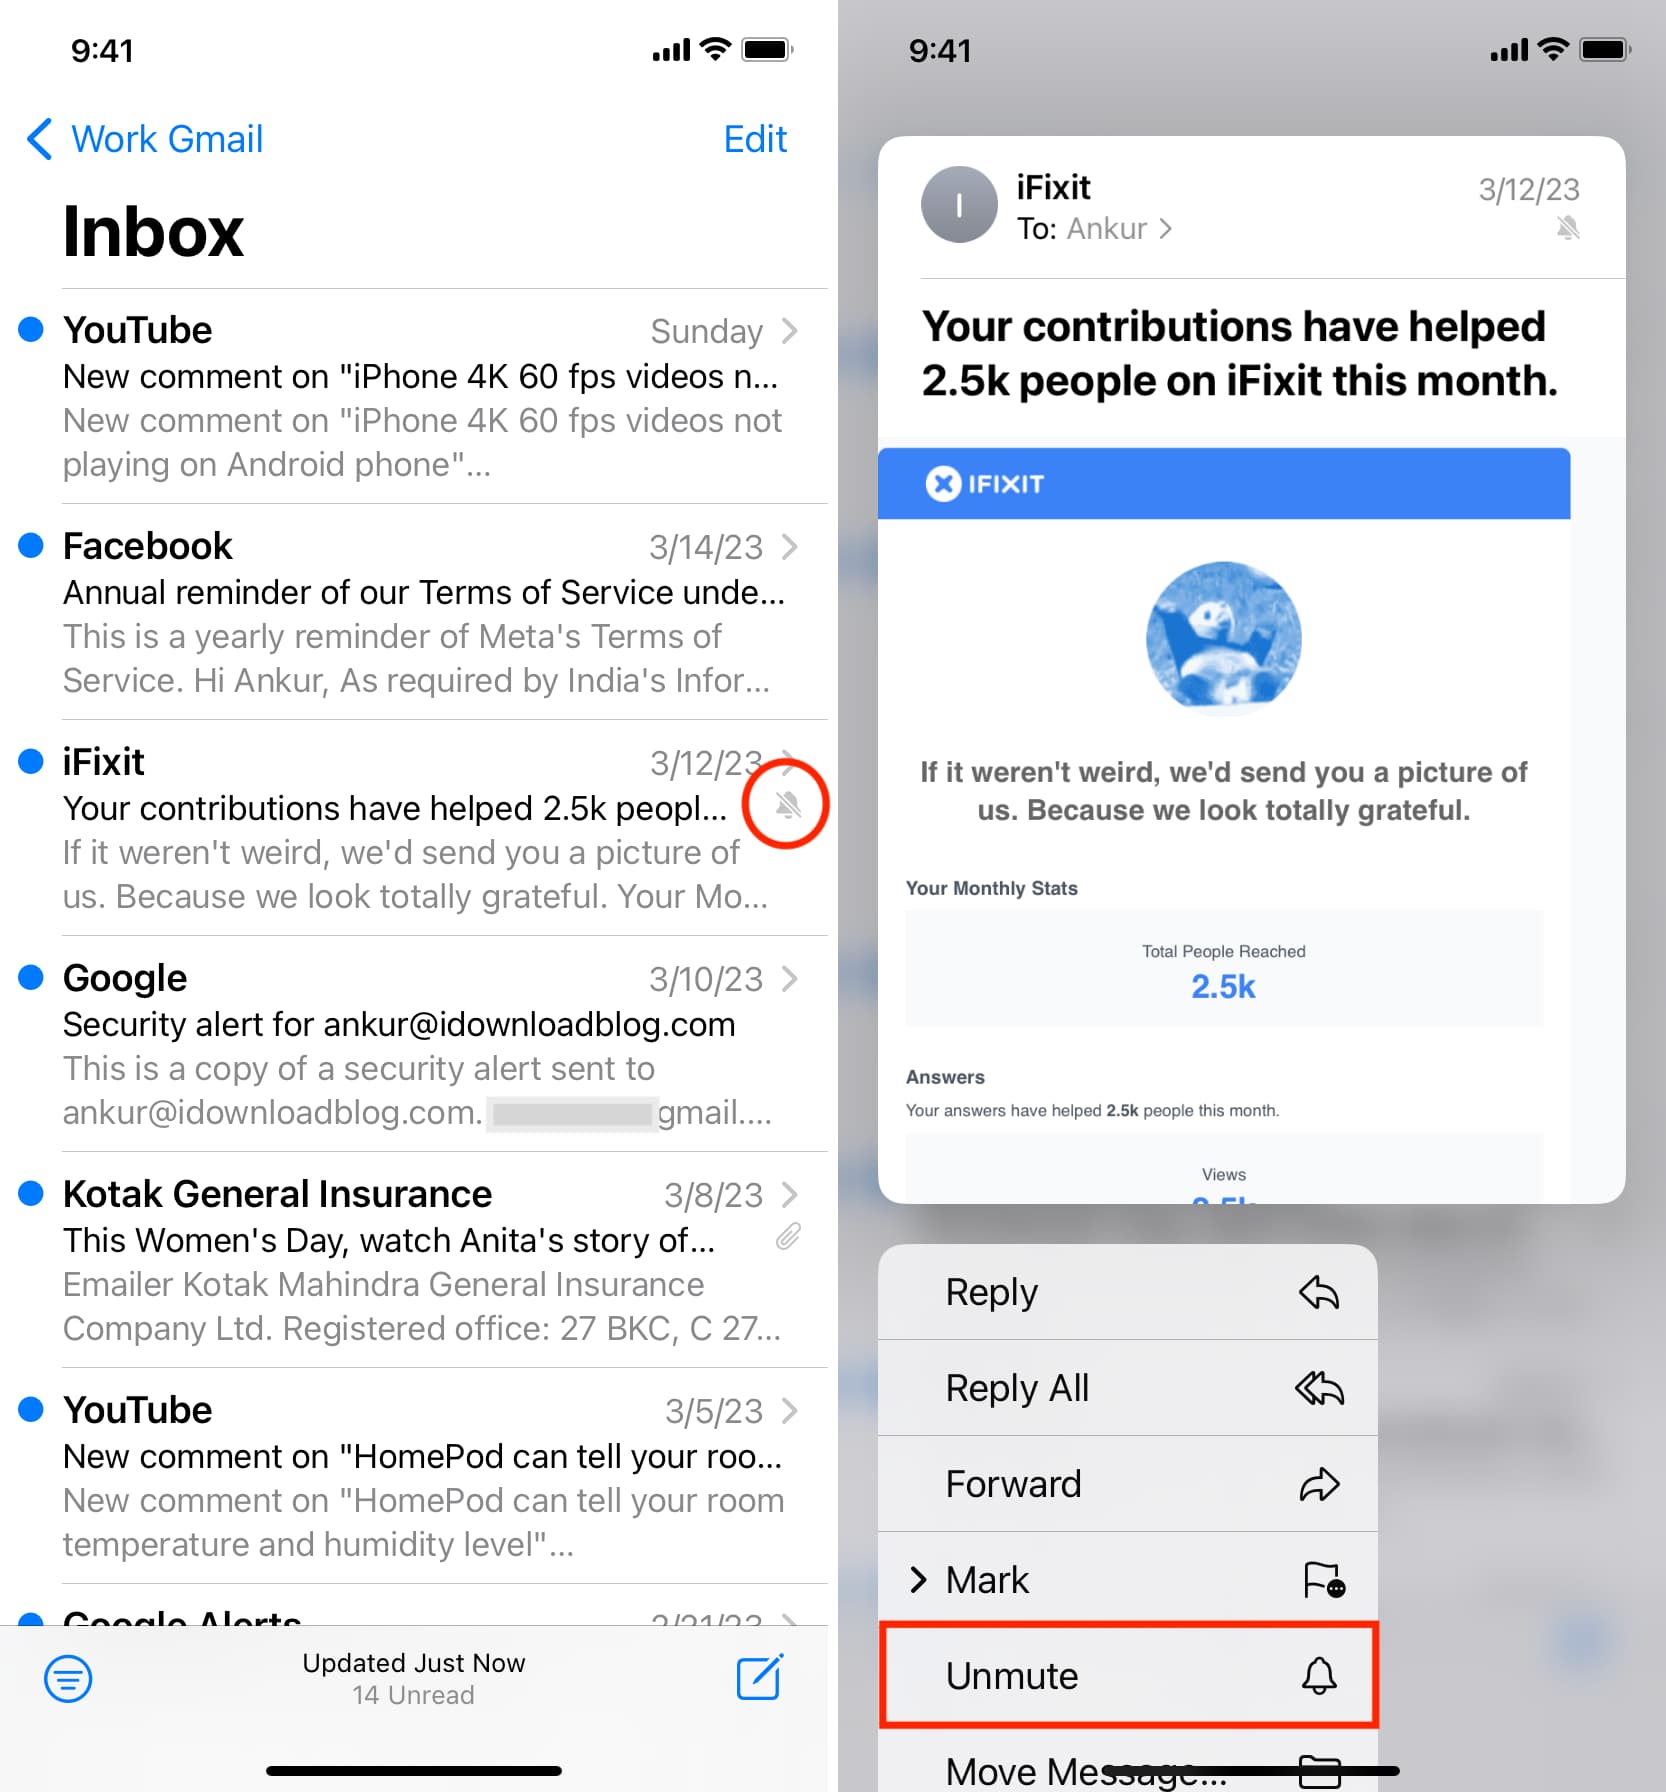 Unmute email thread in iPhone Mail app to get notified of new emails